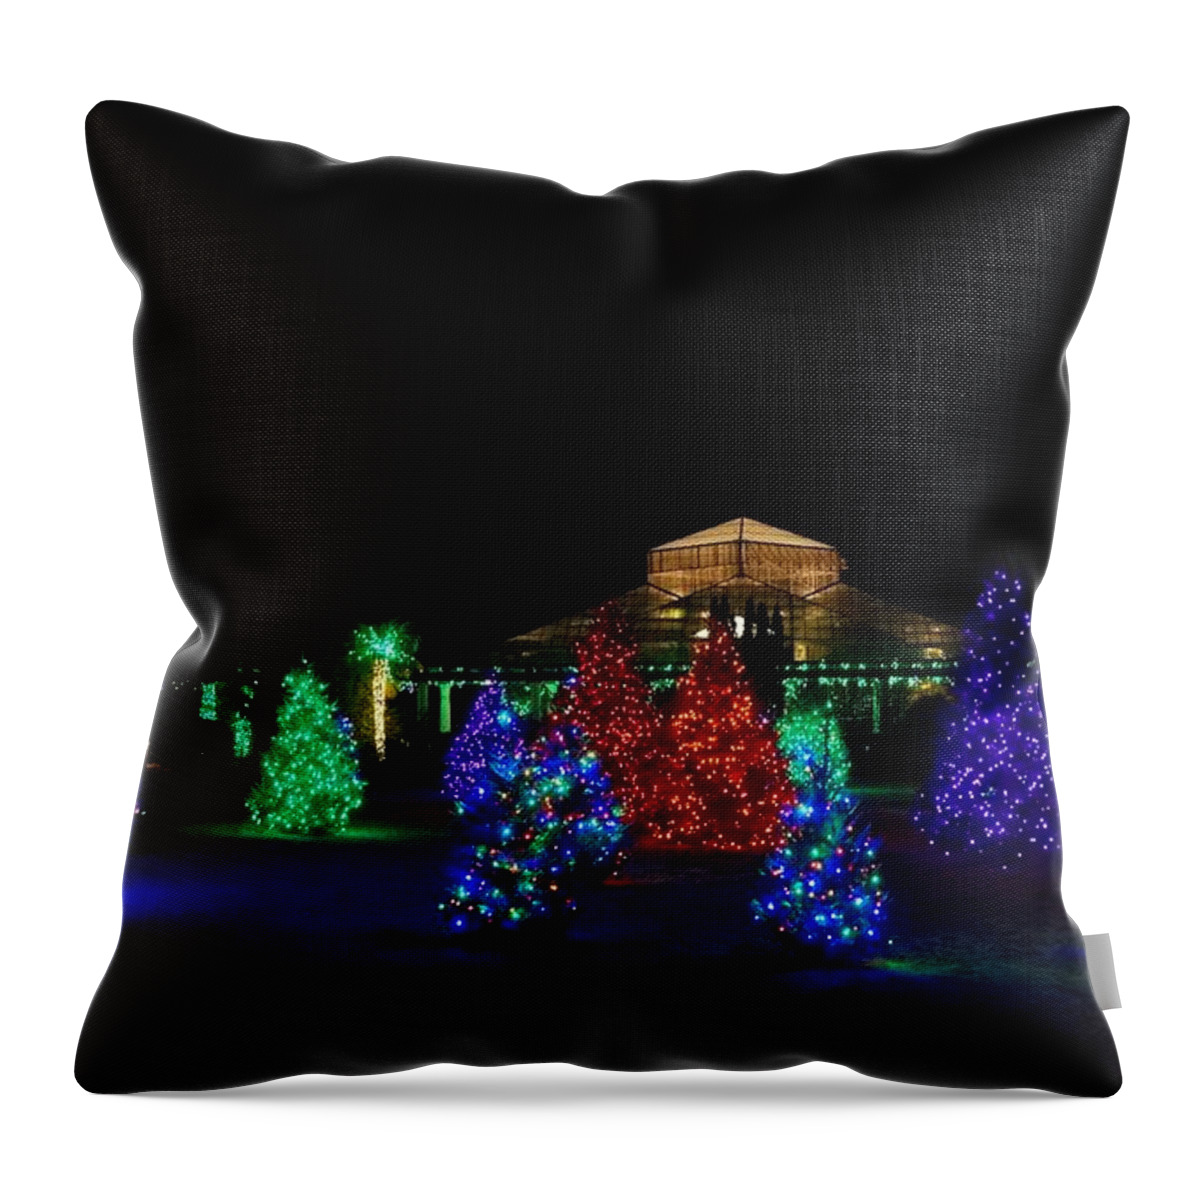  Throw Pillow featuring the photograph Christmas Garden 7 by Rodney Lee Williams